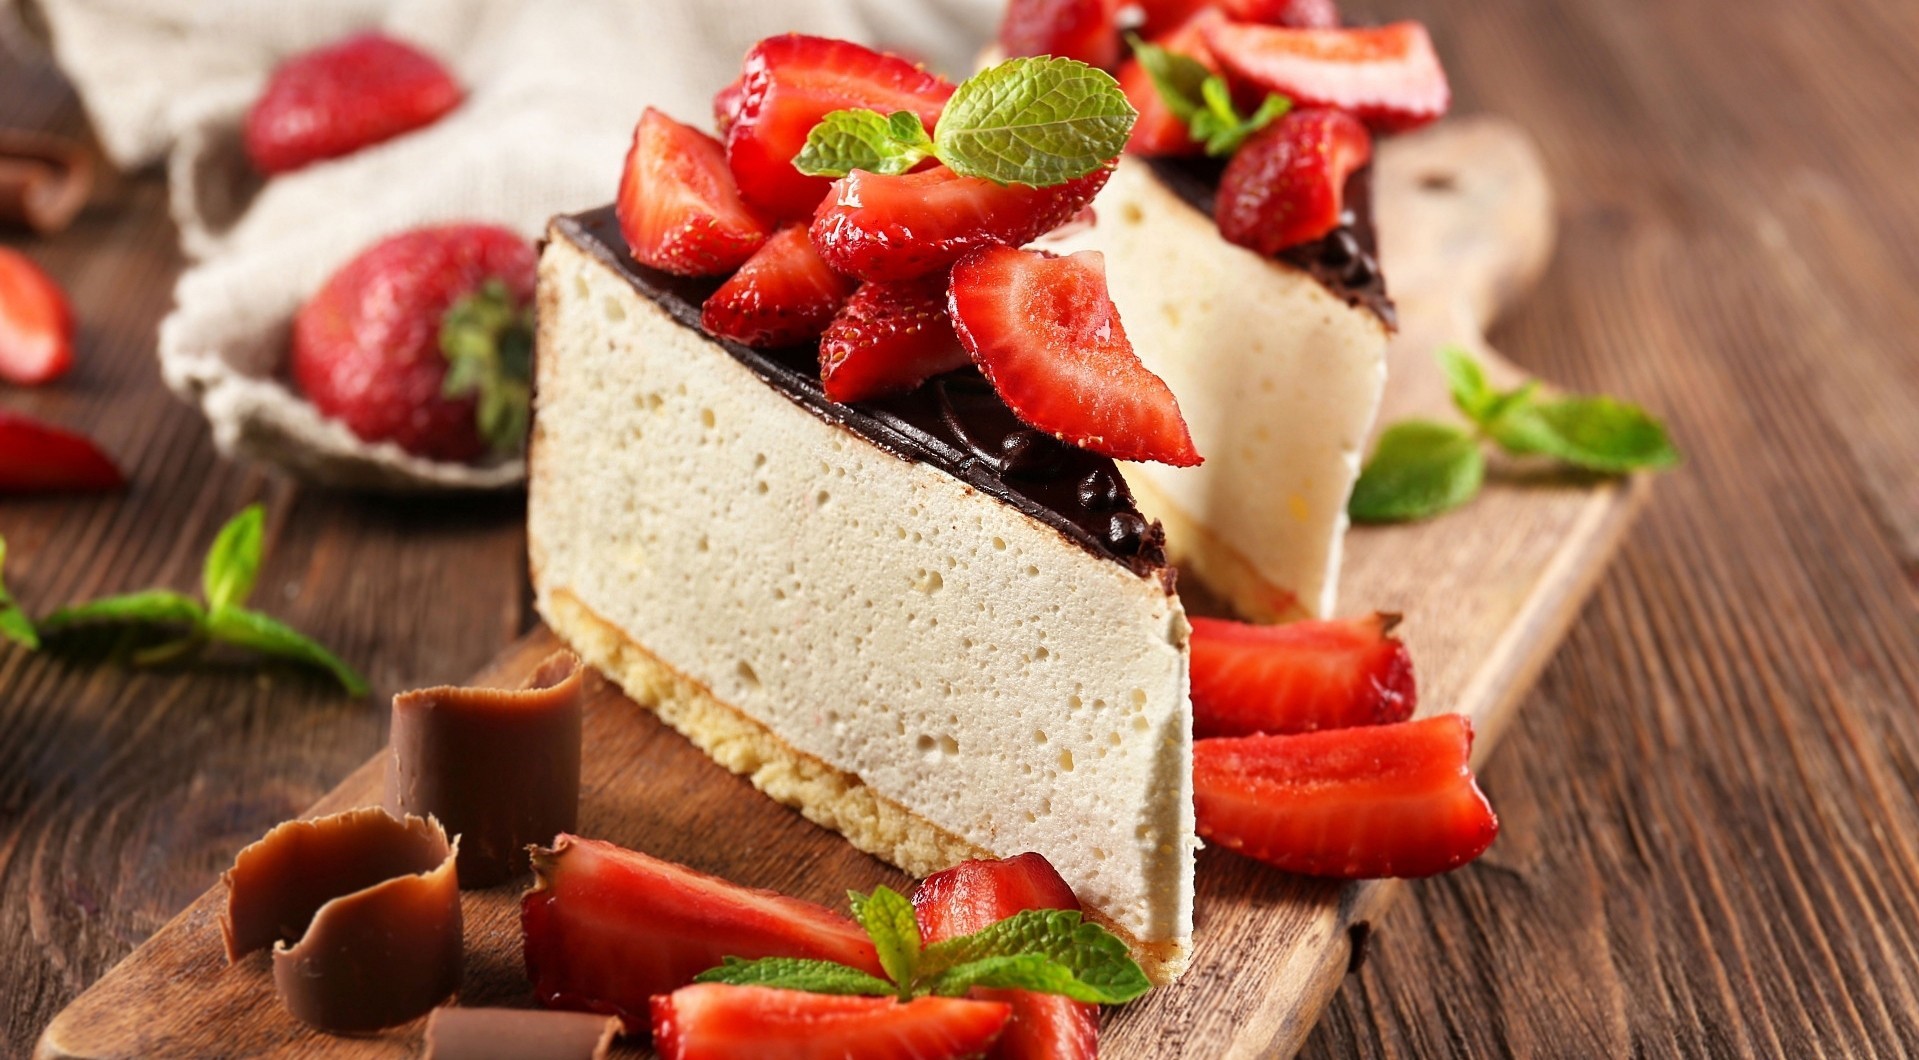 General 1919x1060 strawberries Cheesecake fruit sweets food cake mint leaves cutting board wooden surface chocolate